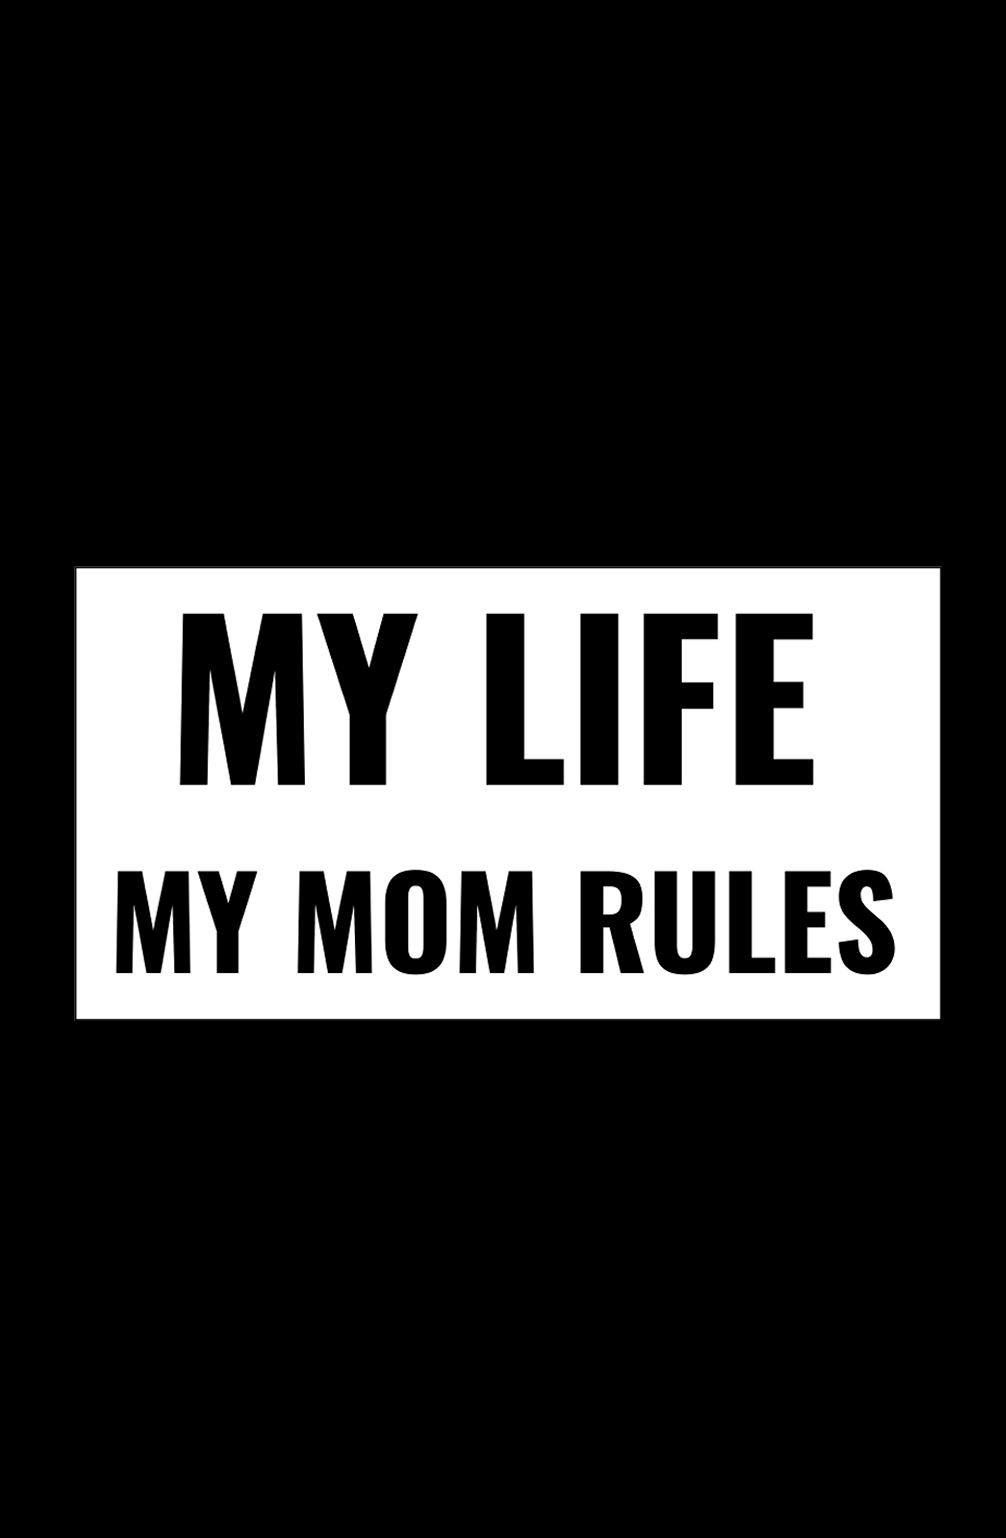 My life rules inspirational quote background Vector Image